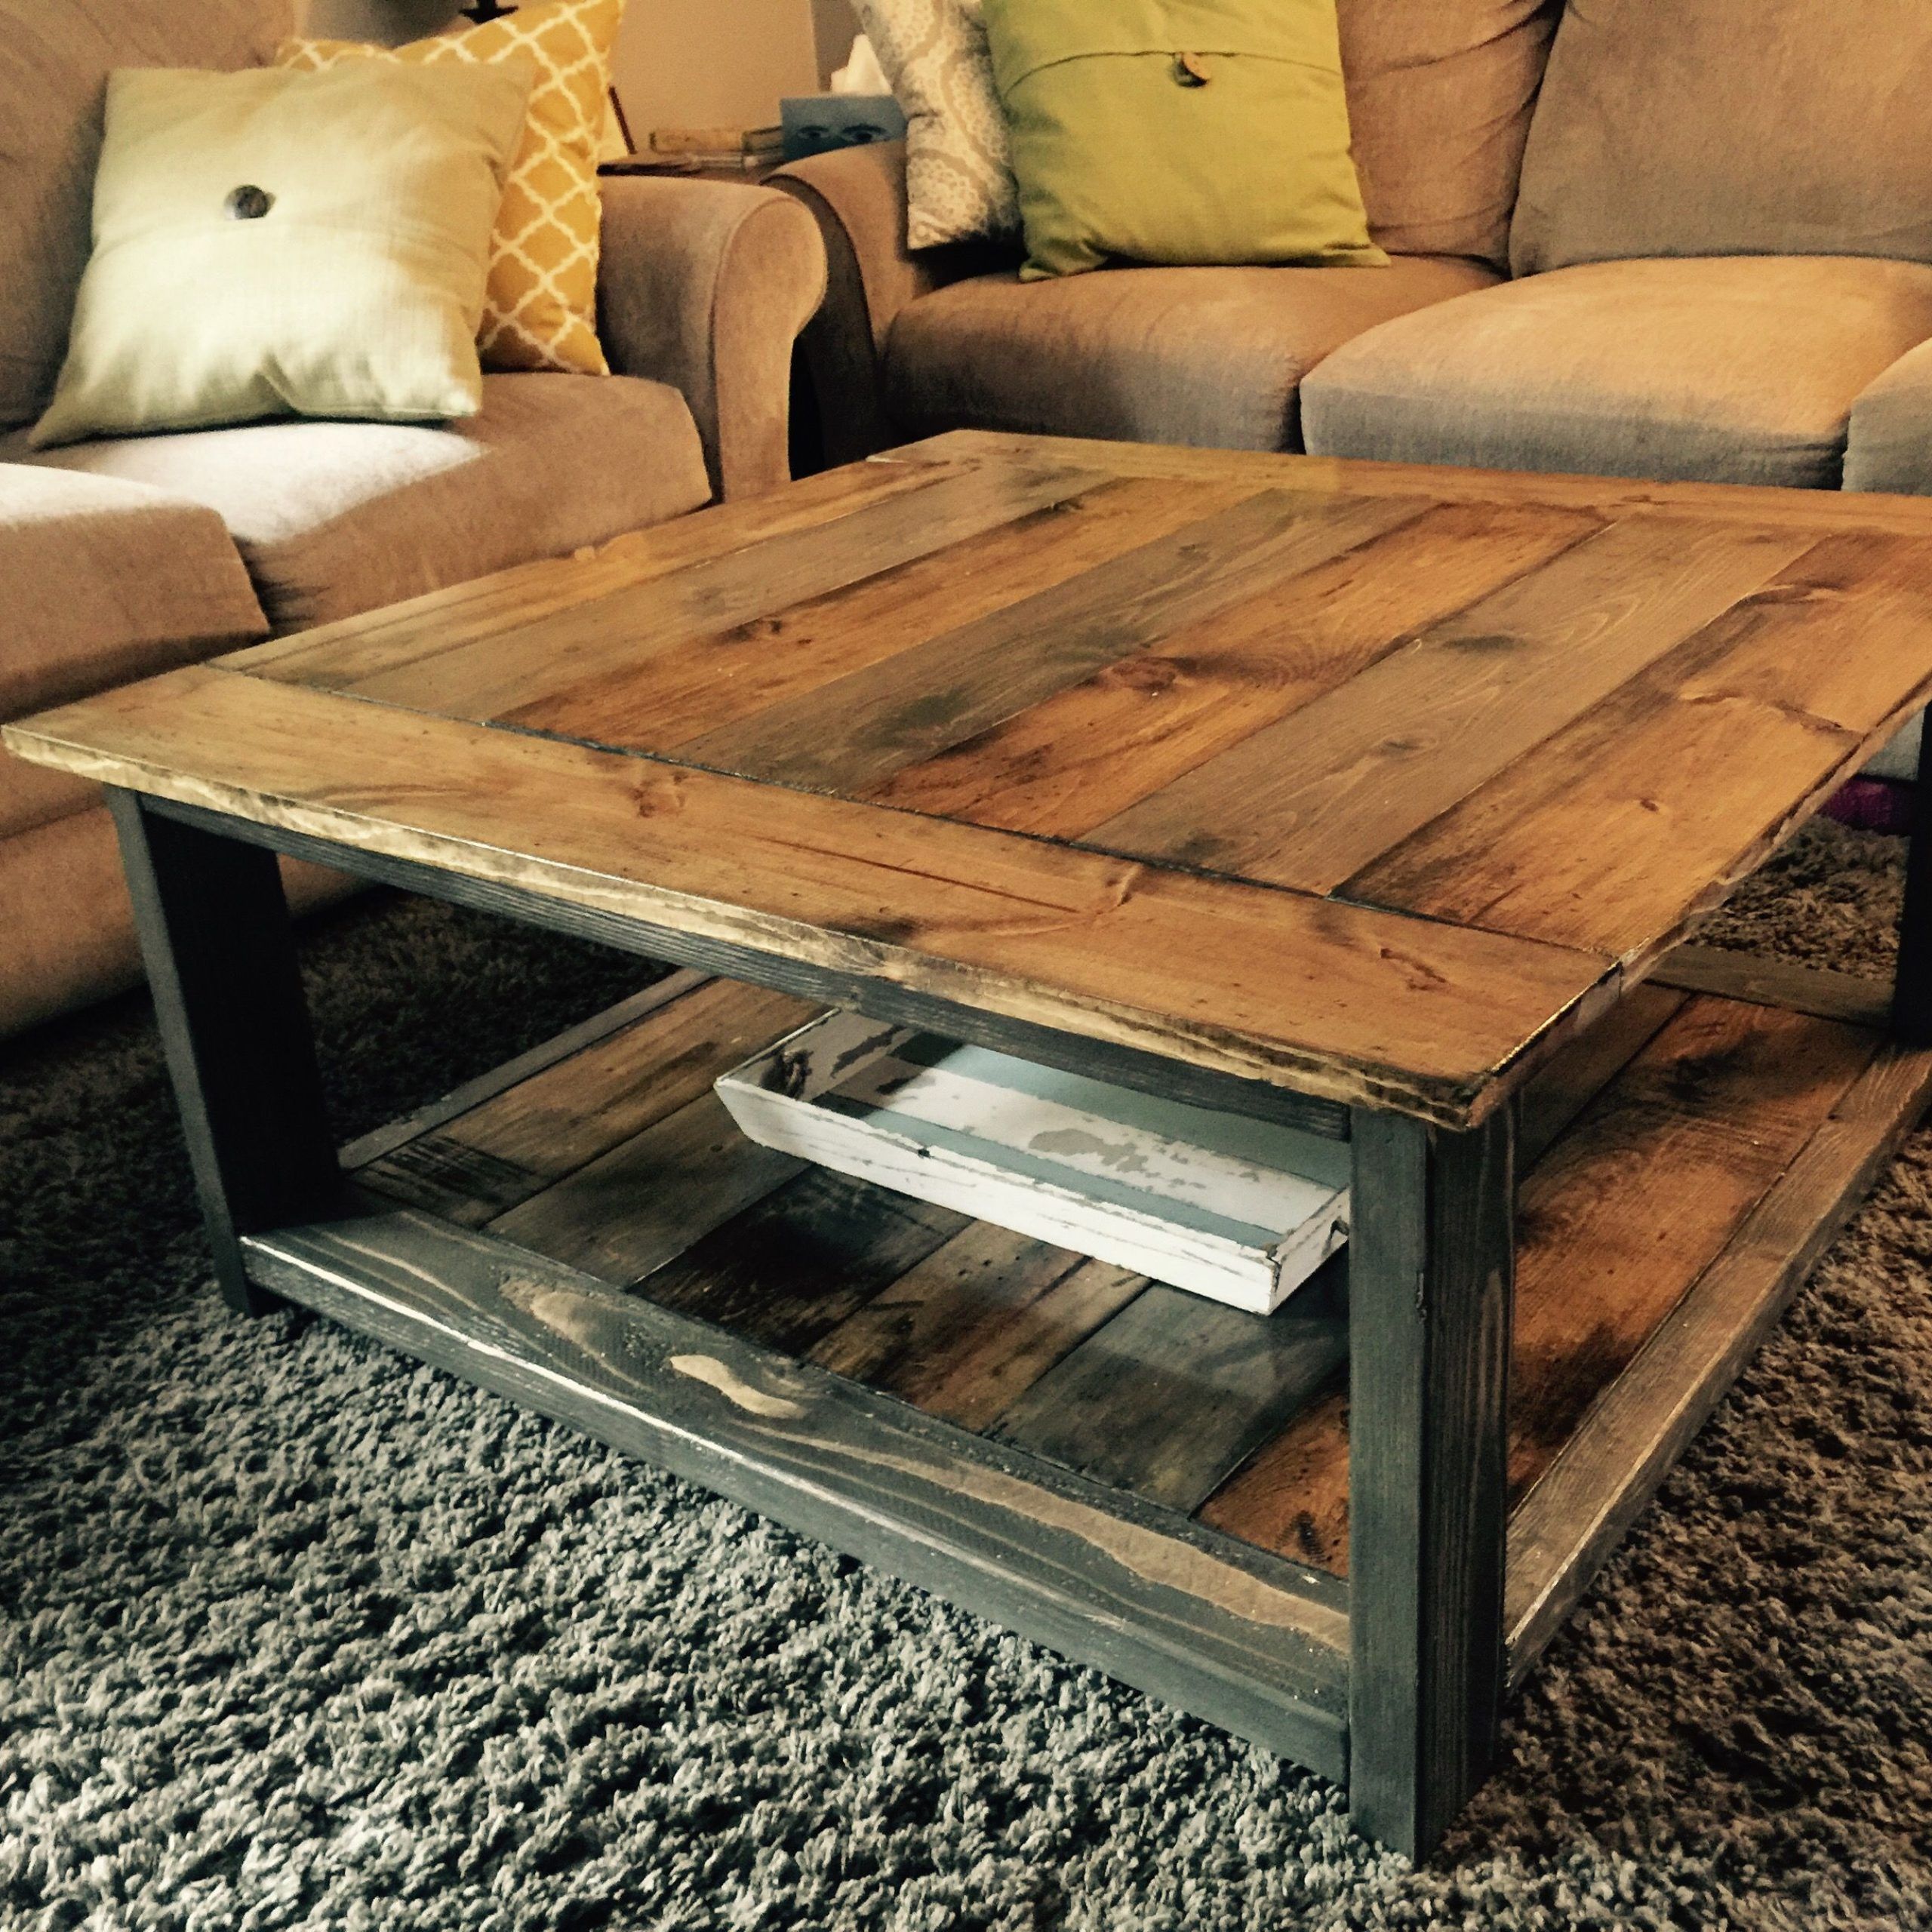 Rustic Xless Coffee Table | Do It Yourself Home Projects From Ana White Within Rustic Wood Coffee Tables (View 9 of 21)